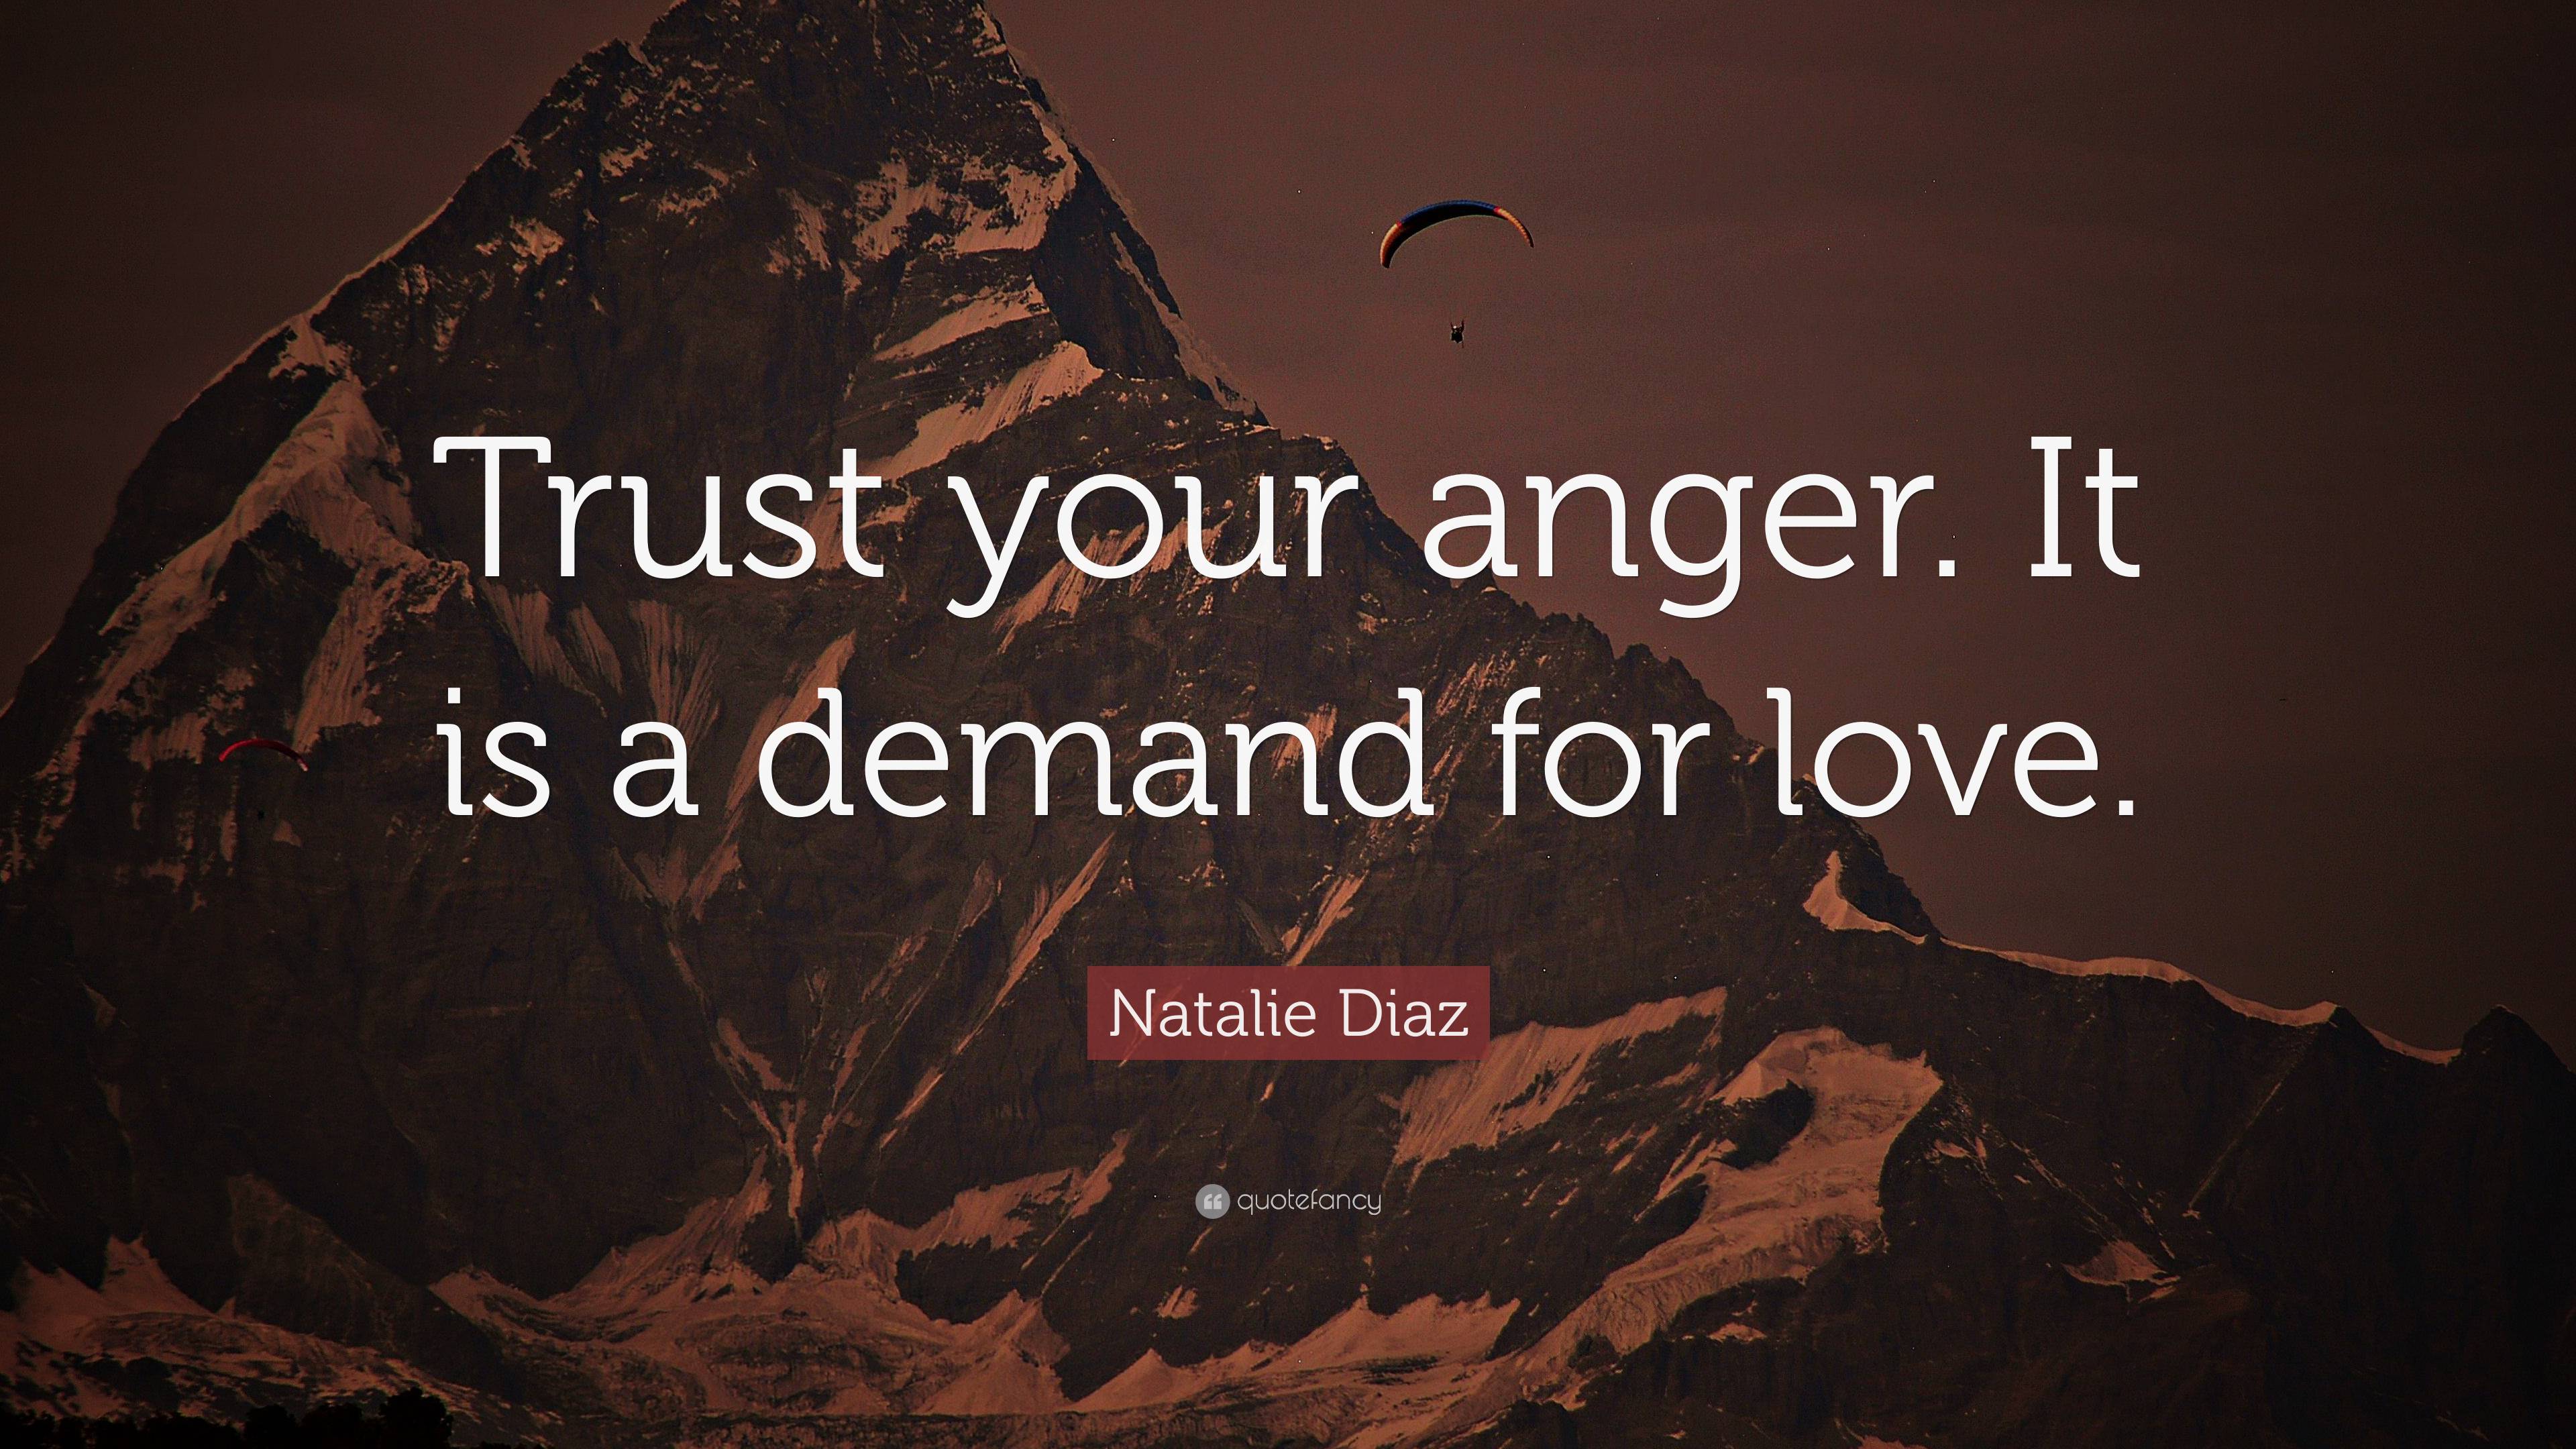 Love behind your anger quotes